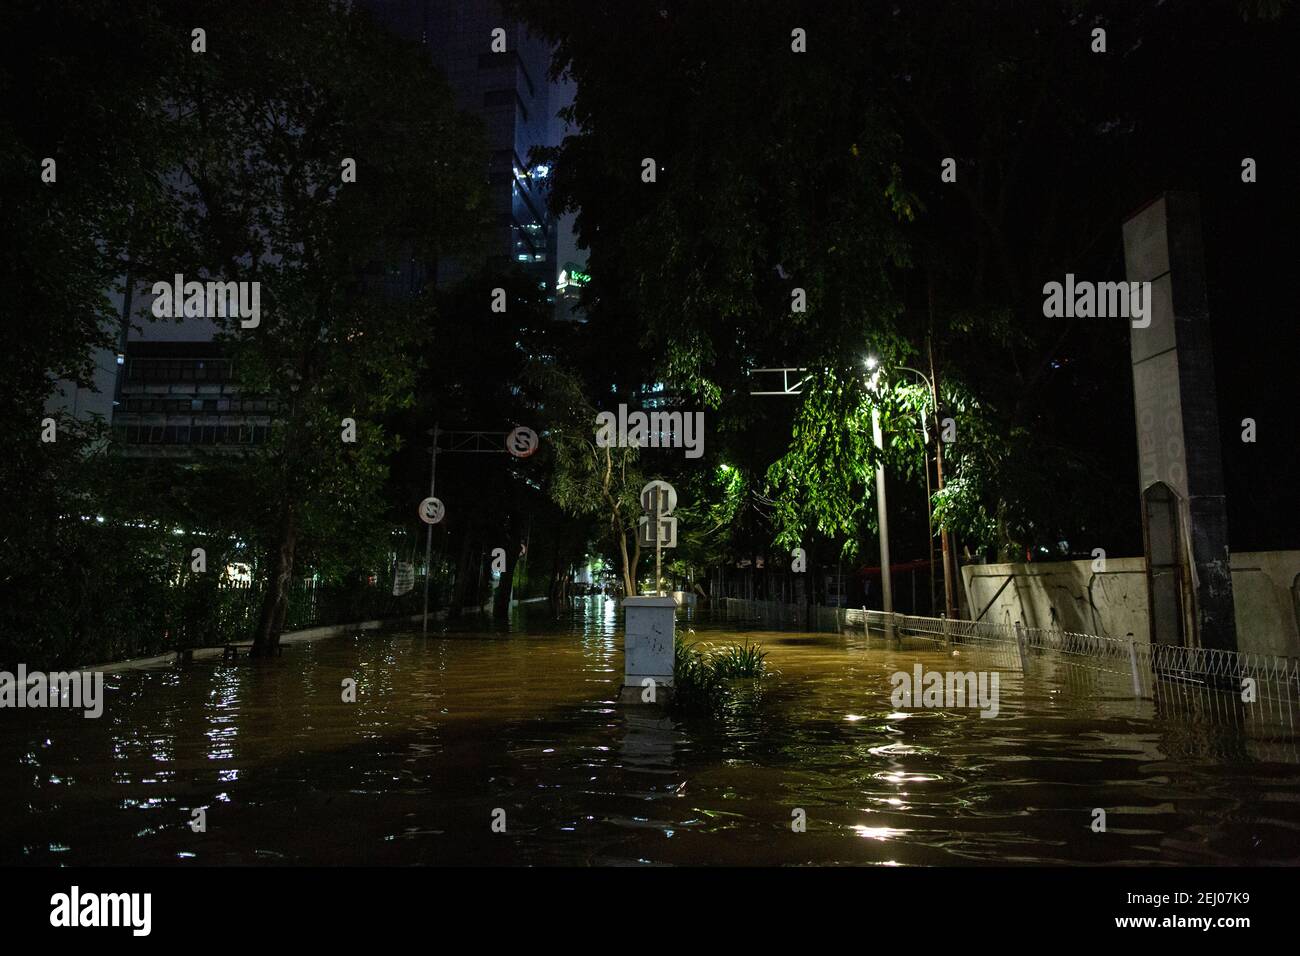 Jakarta, Jakarta, Indonesia. 20th Feb, 2021. A view of a flood following heavy rains at business district in Jakarta, Indonesia on February 20, 2021. At least 21 areas in the Indonesian capital were hit by floods Saturday following heavy rains, during which thousands of homes were also damaged, according to the National Board for Disaster Management Credit: Afriadi Hikmal/ZUMA Wire/Alamy Live News Stock Photo